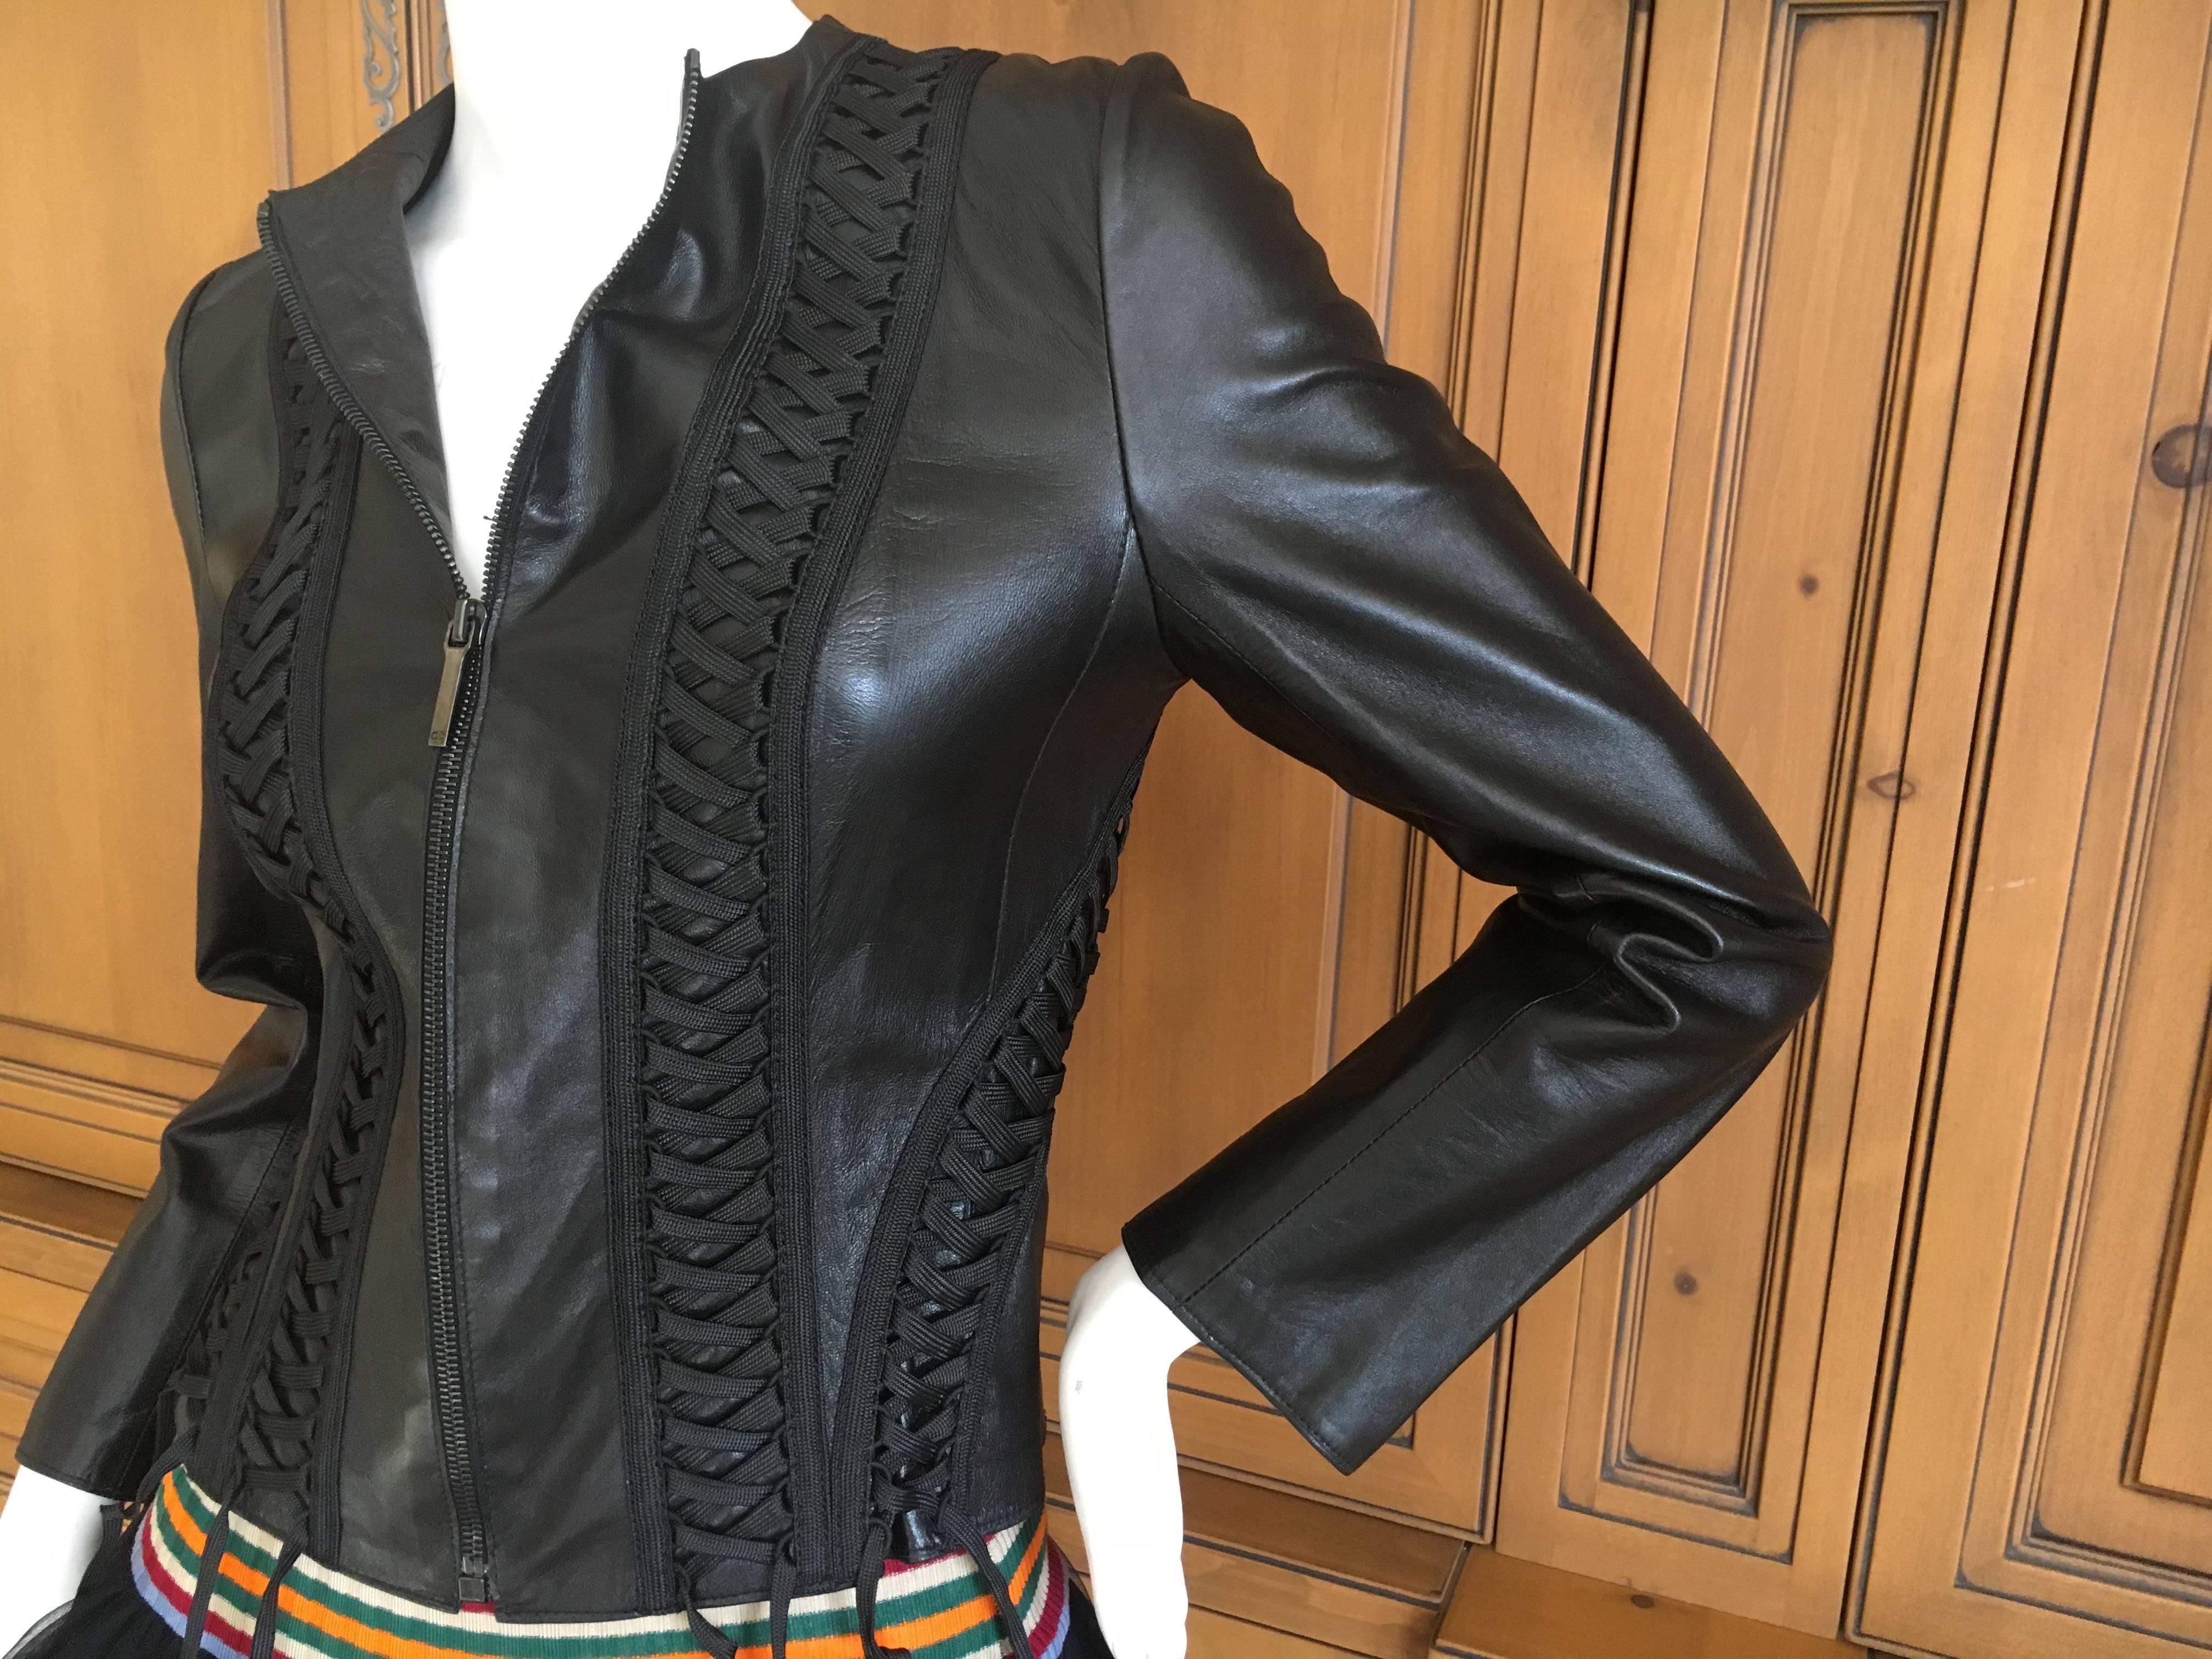 Christian Dior Black Lambskin Leather Corset Laced Bondage Jacket by Galliano For Sale 2